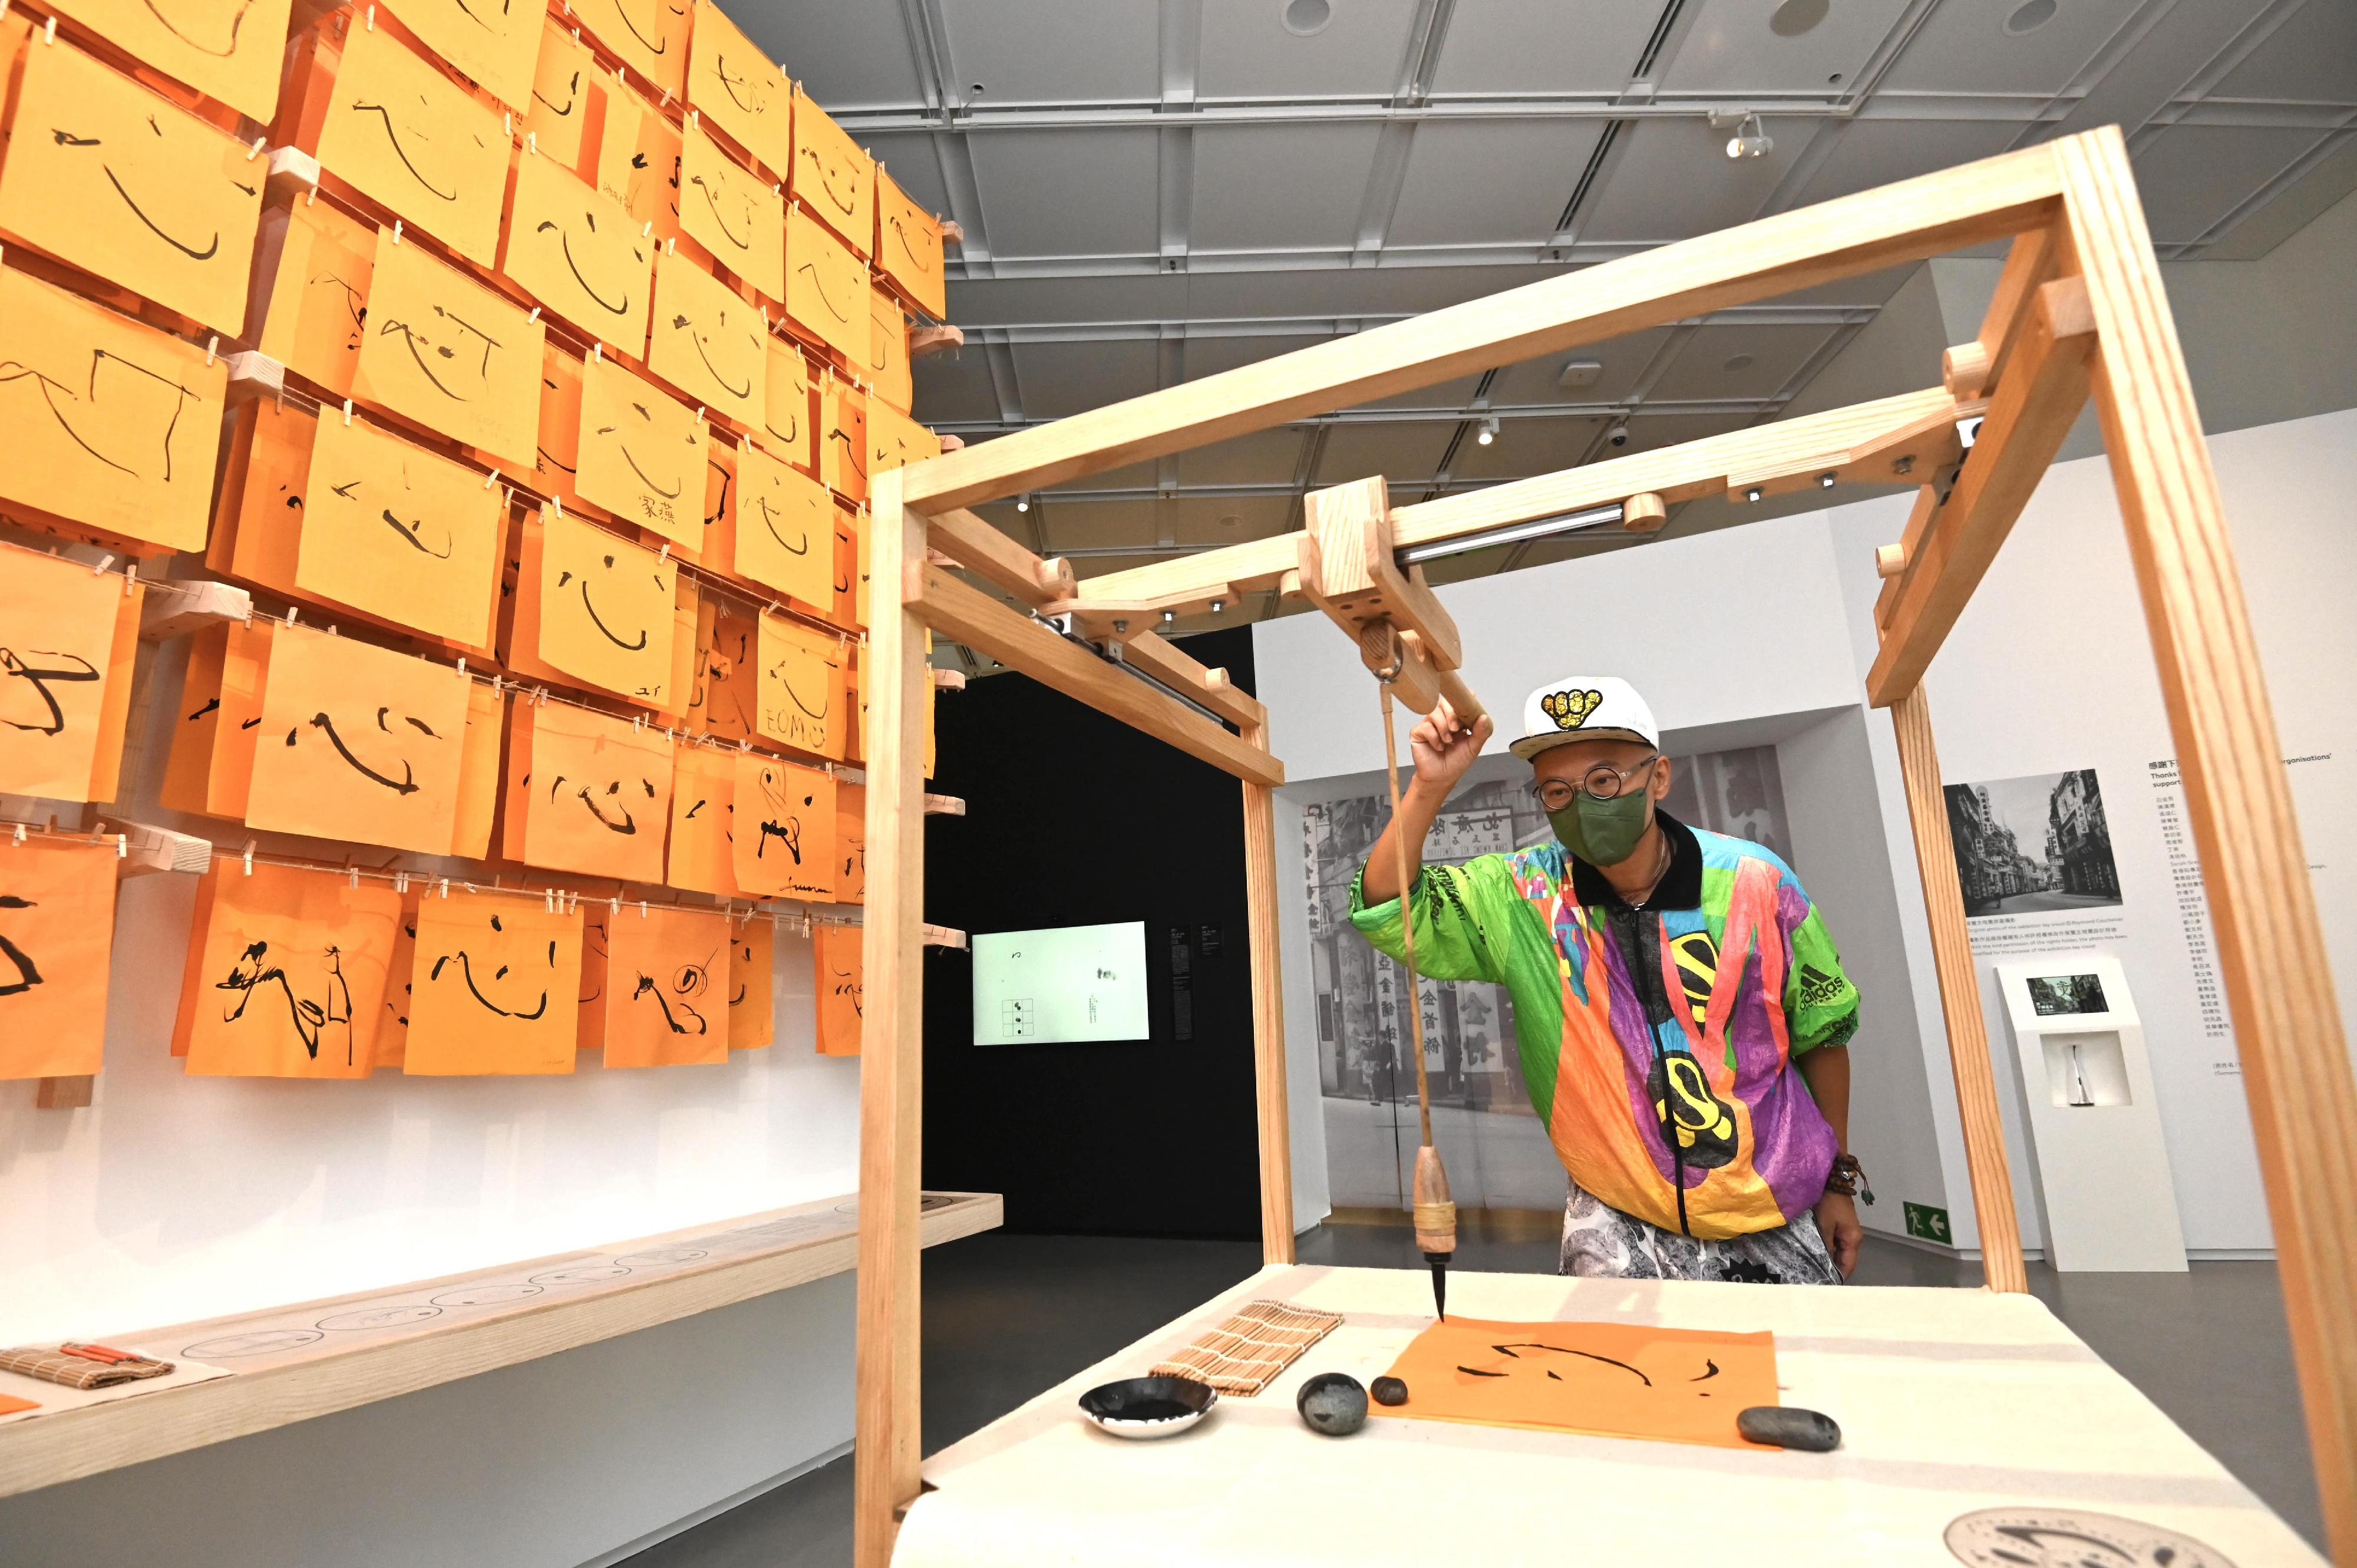 The "By the People: Creative Chinese Characters" exhibition will be staged from tomorrow (September 9) at the Hong Kong Museum of Art. Photo shows a mechanical installation, "Control Freak (v.2)", by Hong Kong artist Hung Keung (pictured).